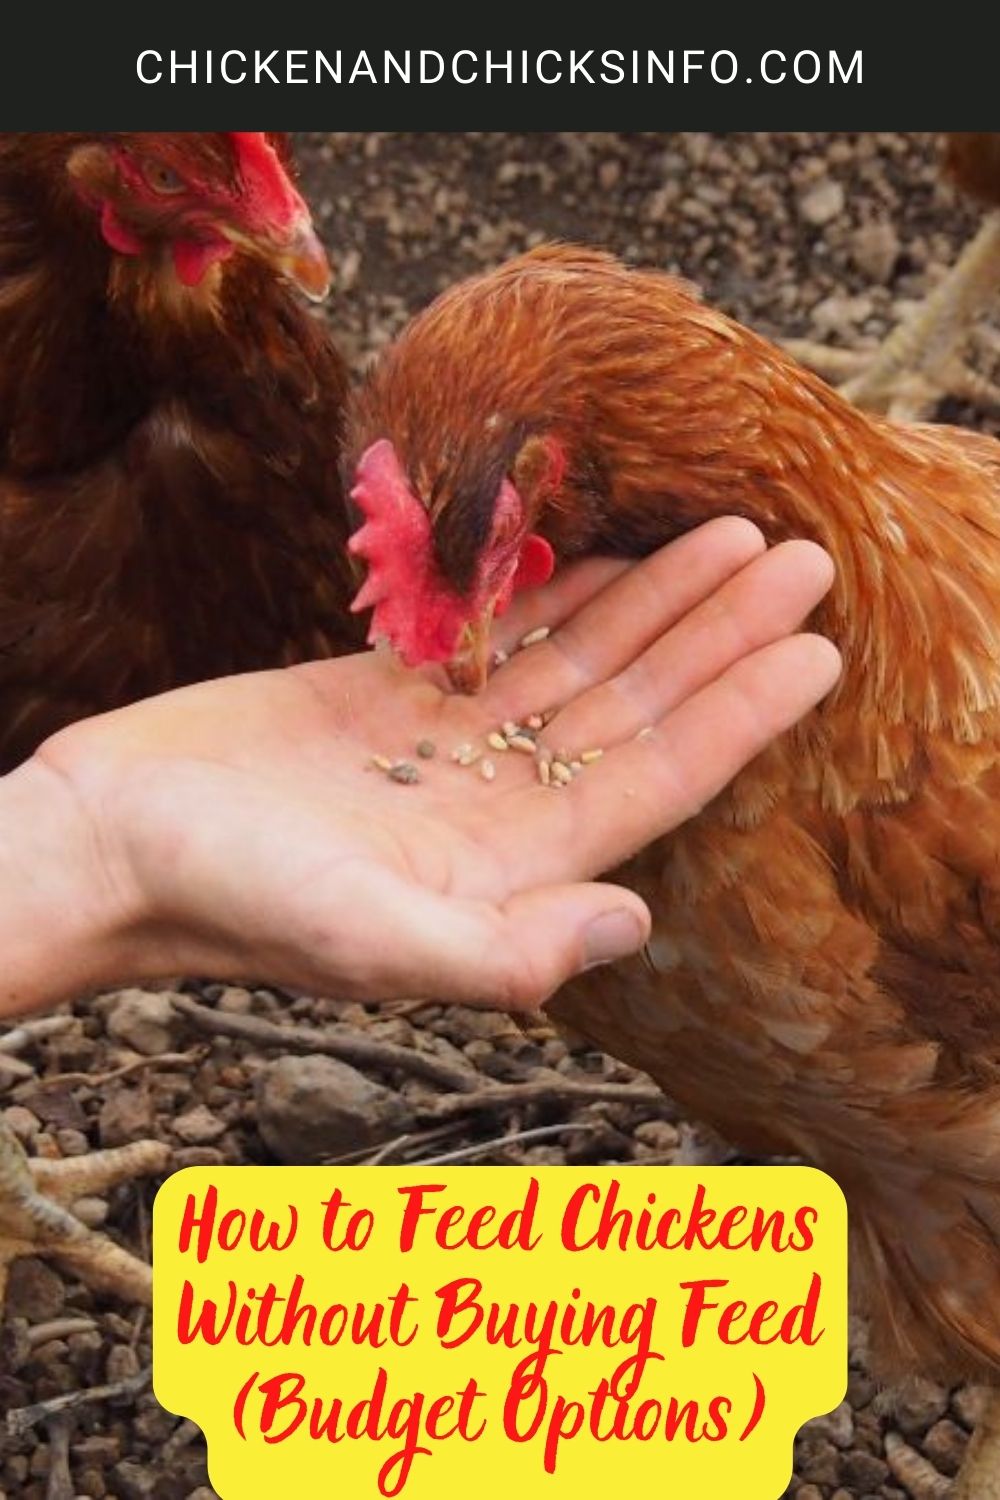 How to Feed Chickens Without Buying Feed poster.
